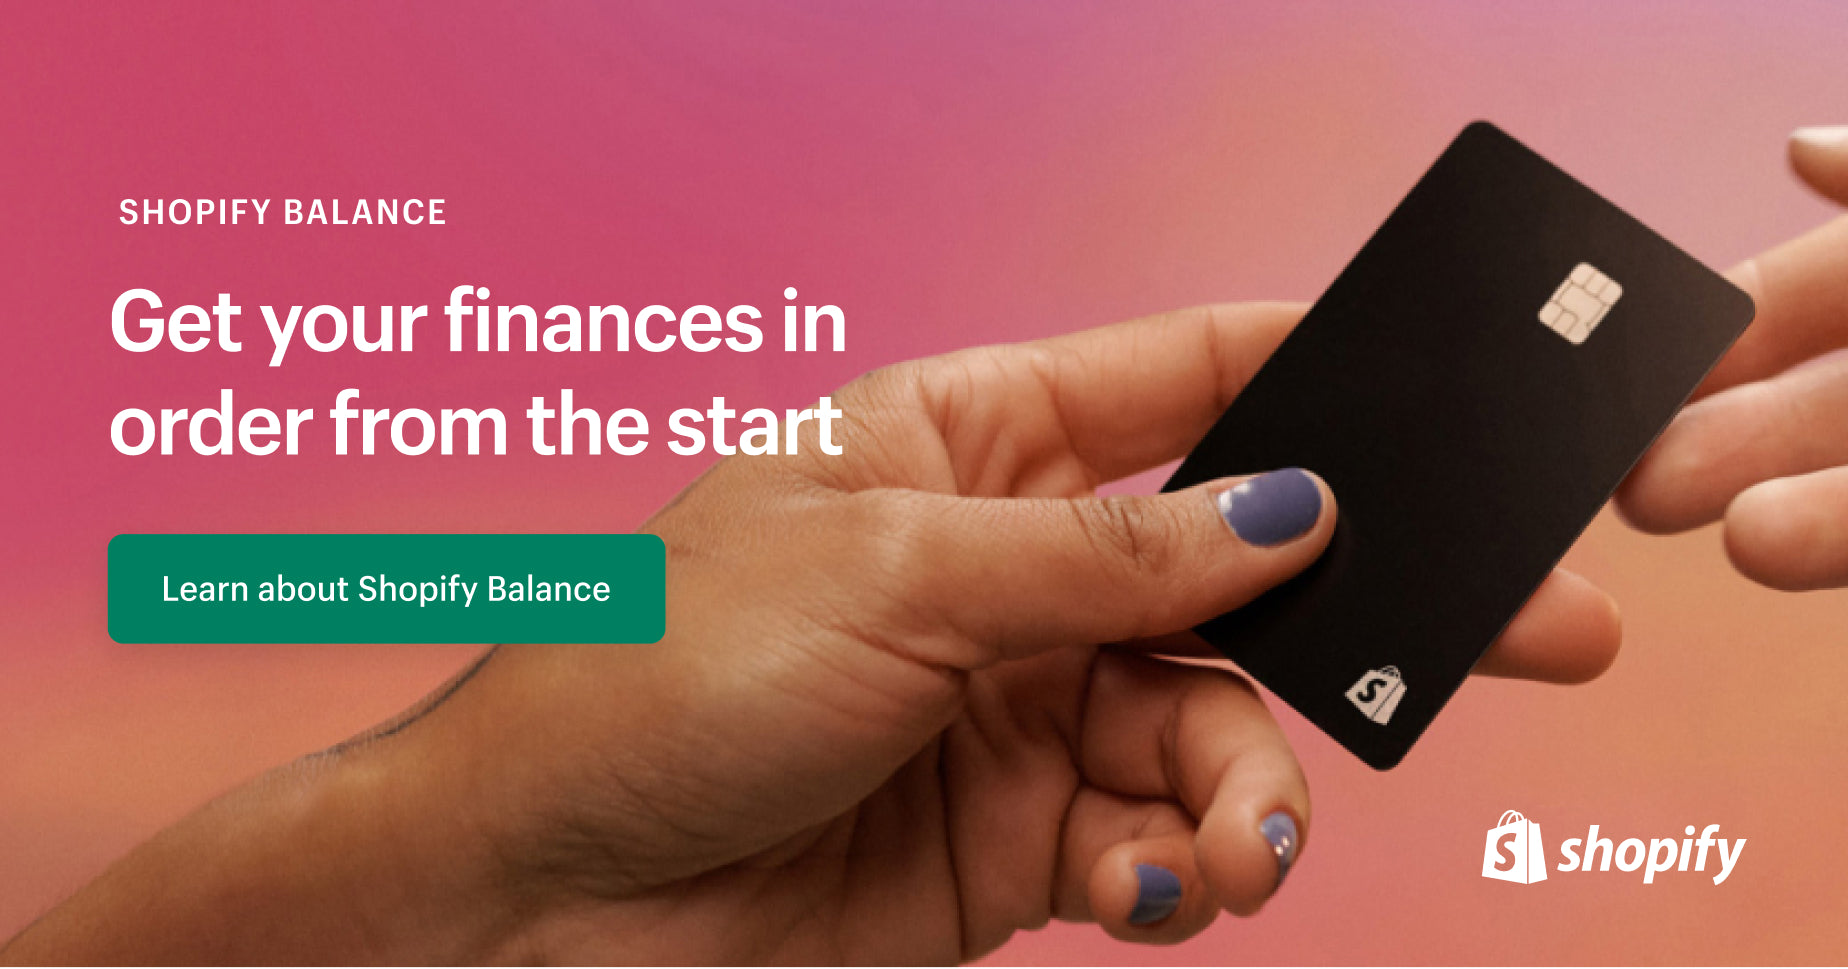 Get your finances in order from the start with Shopify Balance